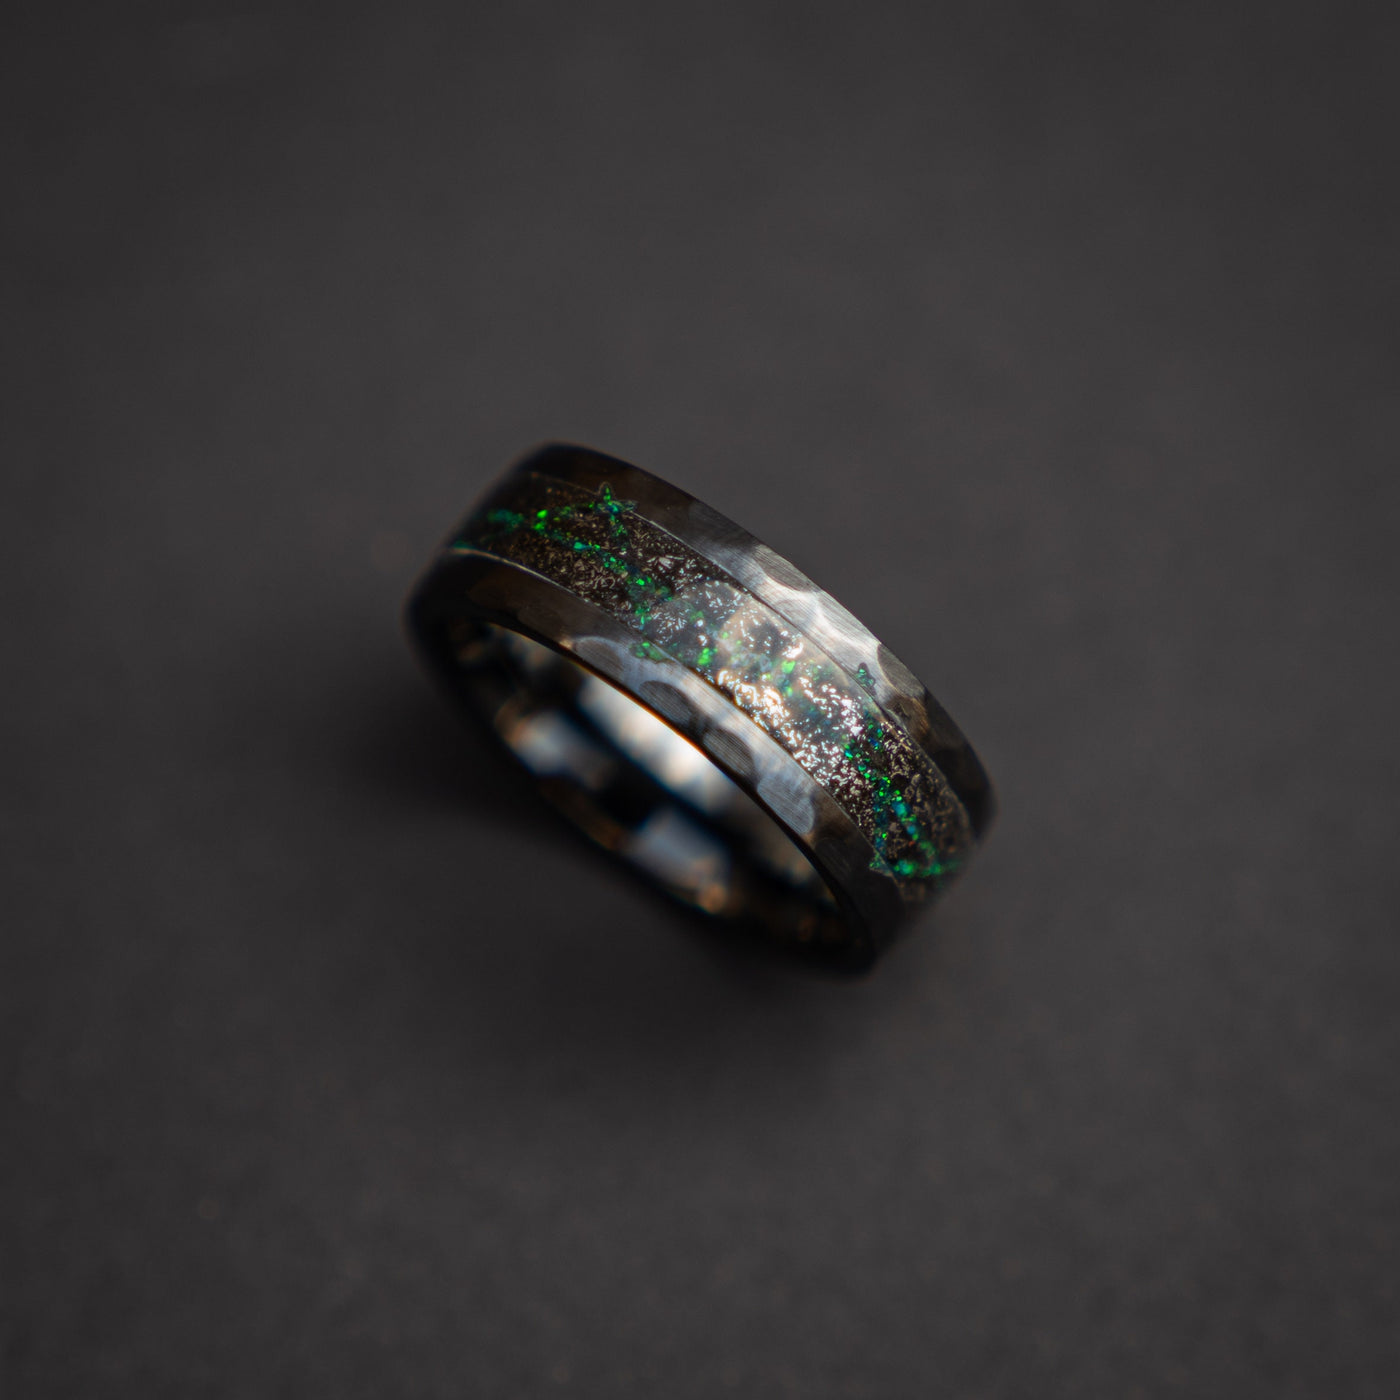 Black Ceramic ring with meteorite and galaxy opal, wedding band, engagement ring